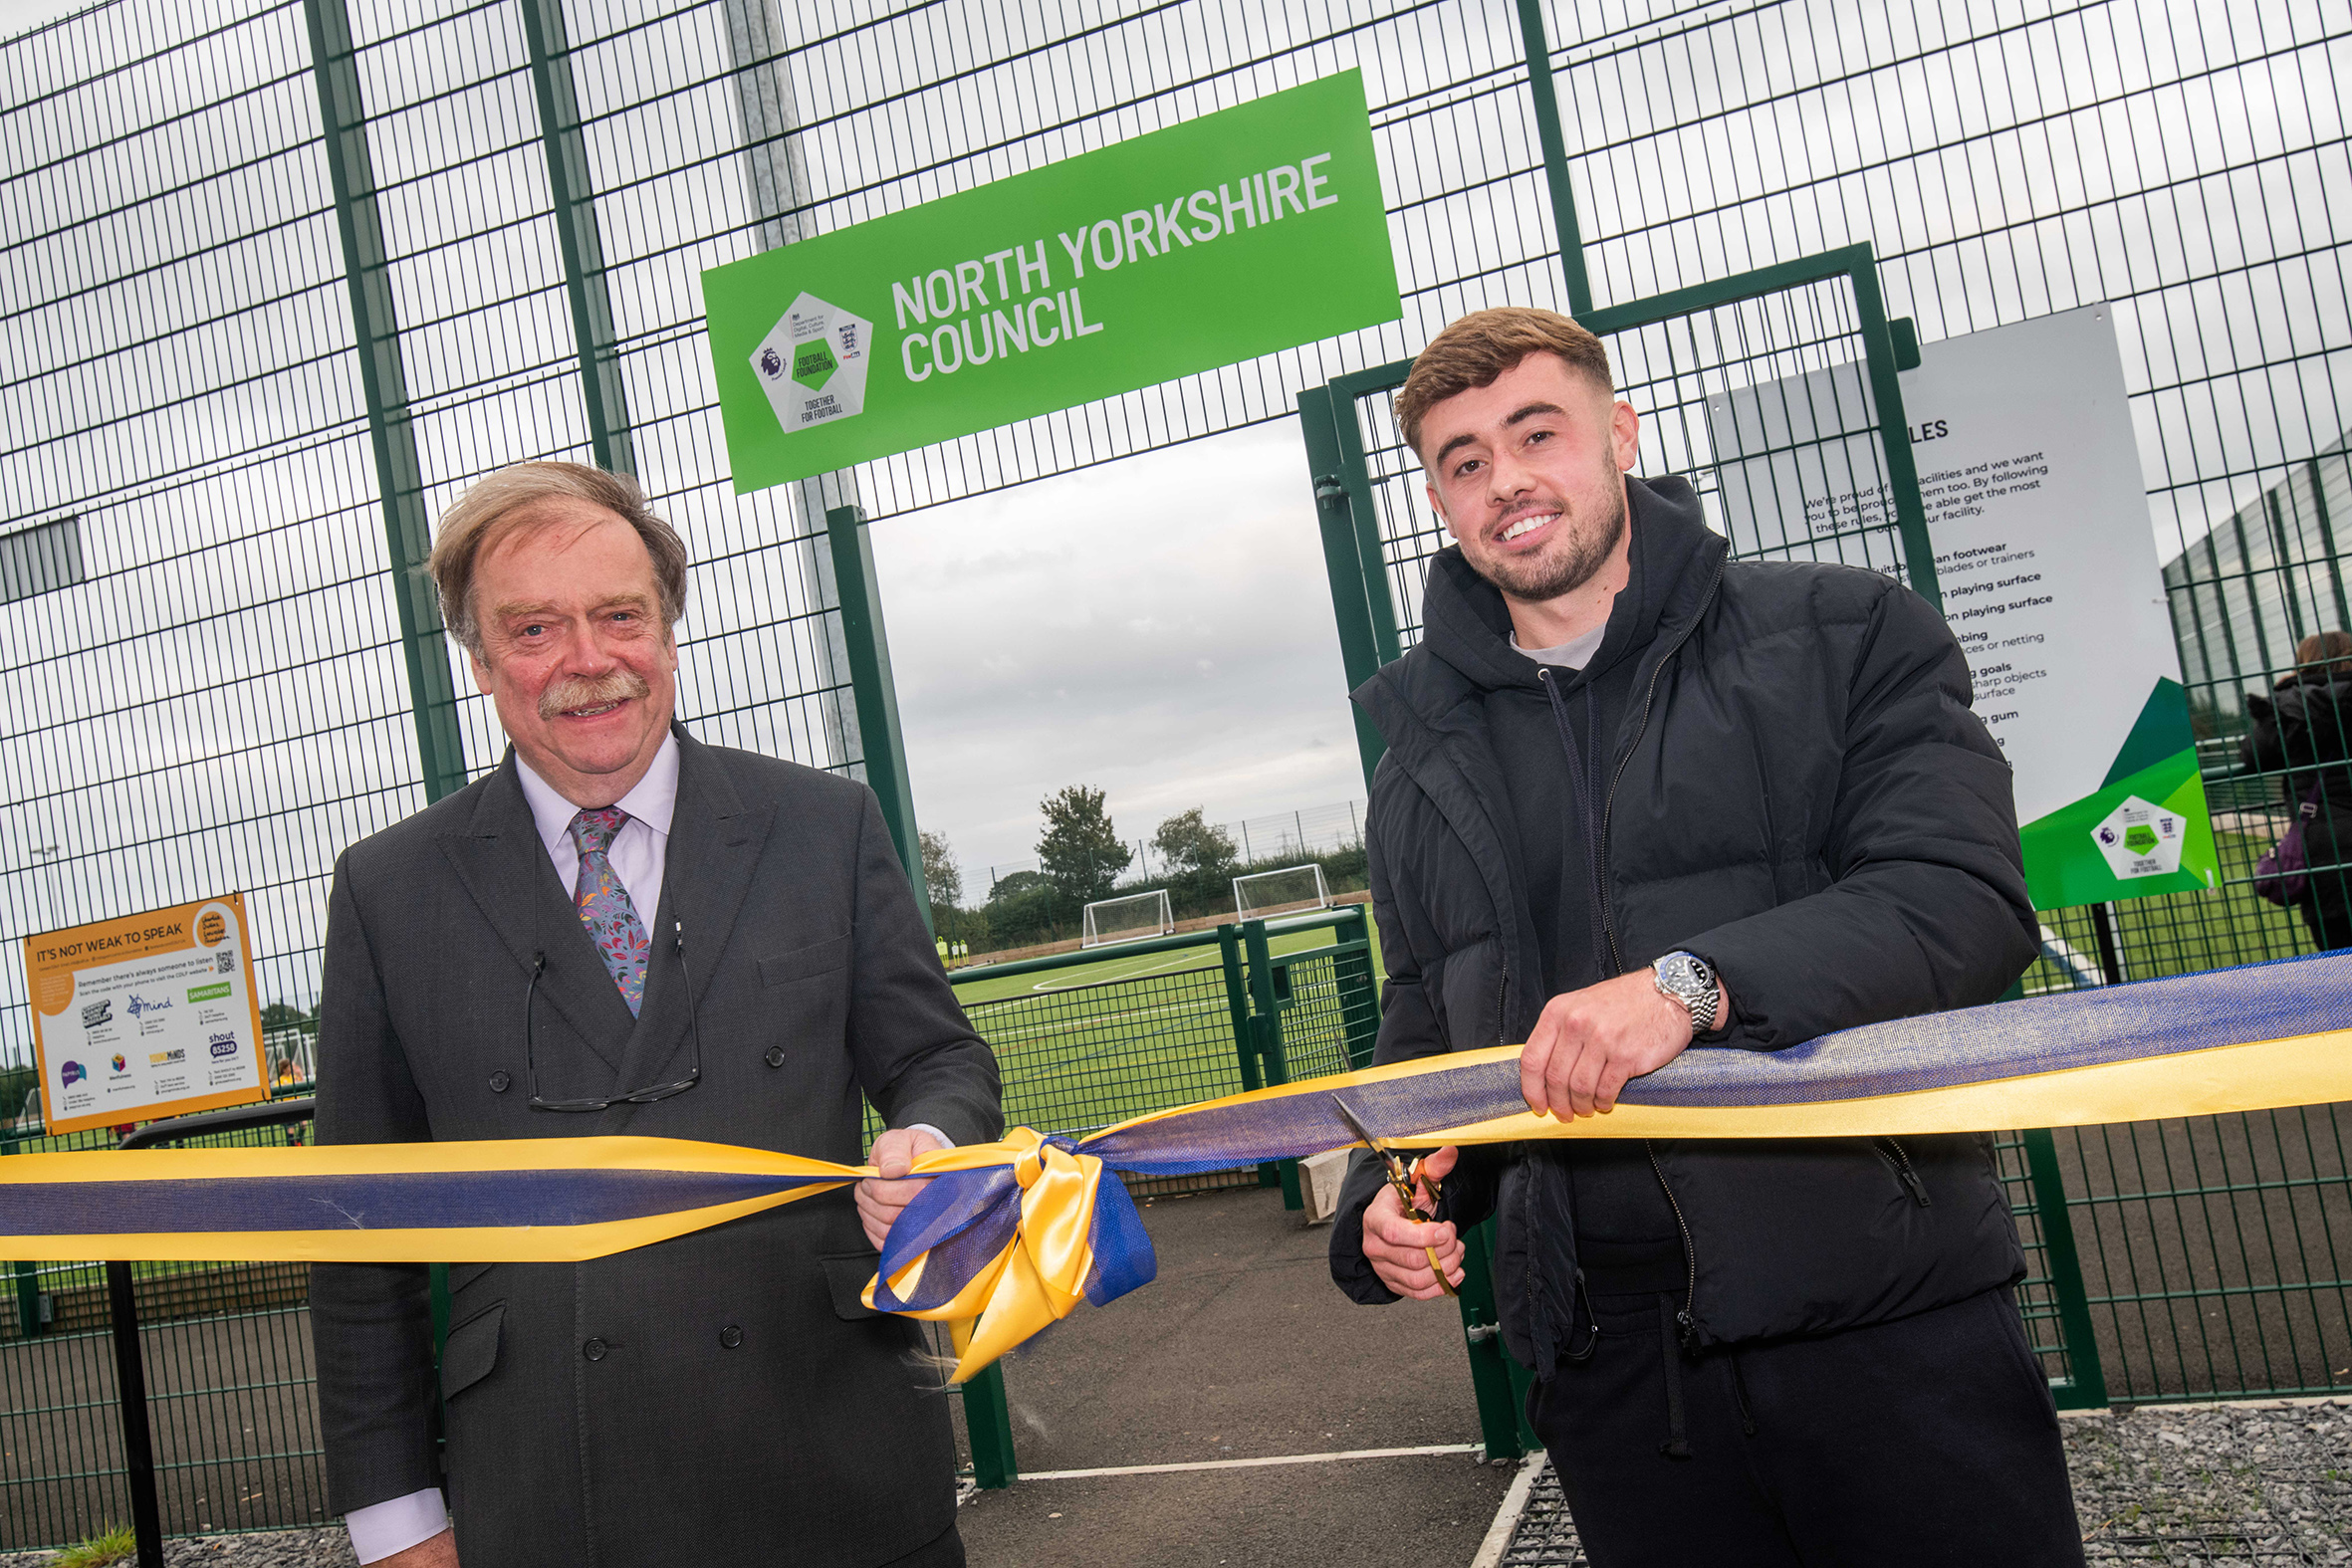 Carlisle United Midfielder Alfie McCalmont cutting the ribbon at the official opening of a new 3G pitch and pavilion at the Sowerby Sports Village. 